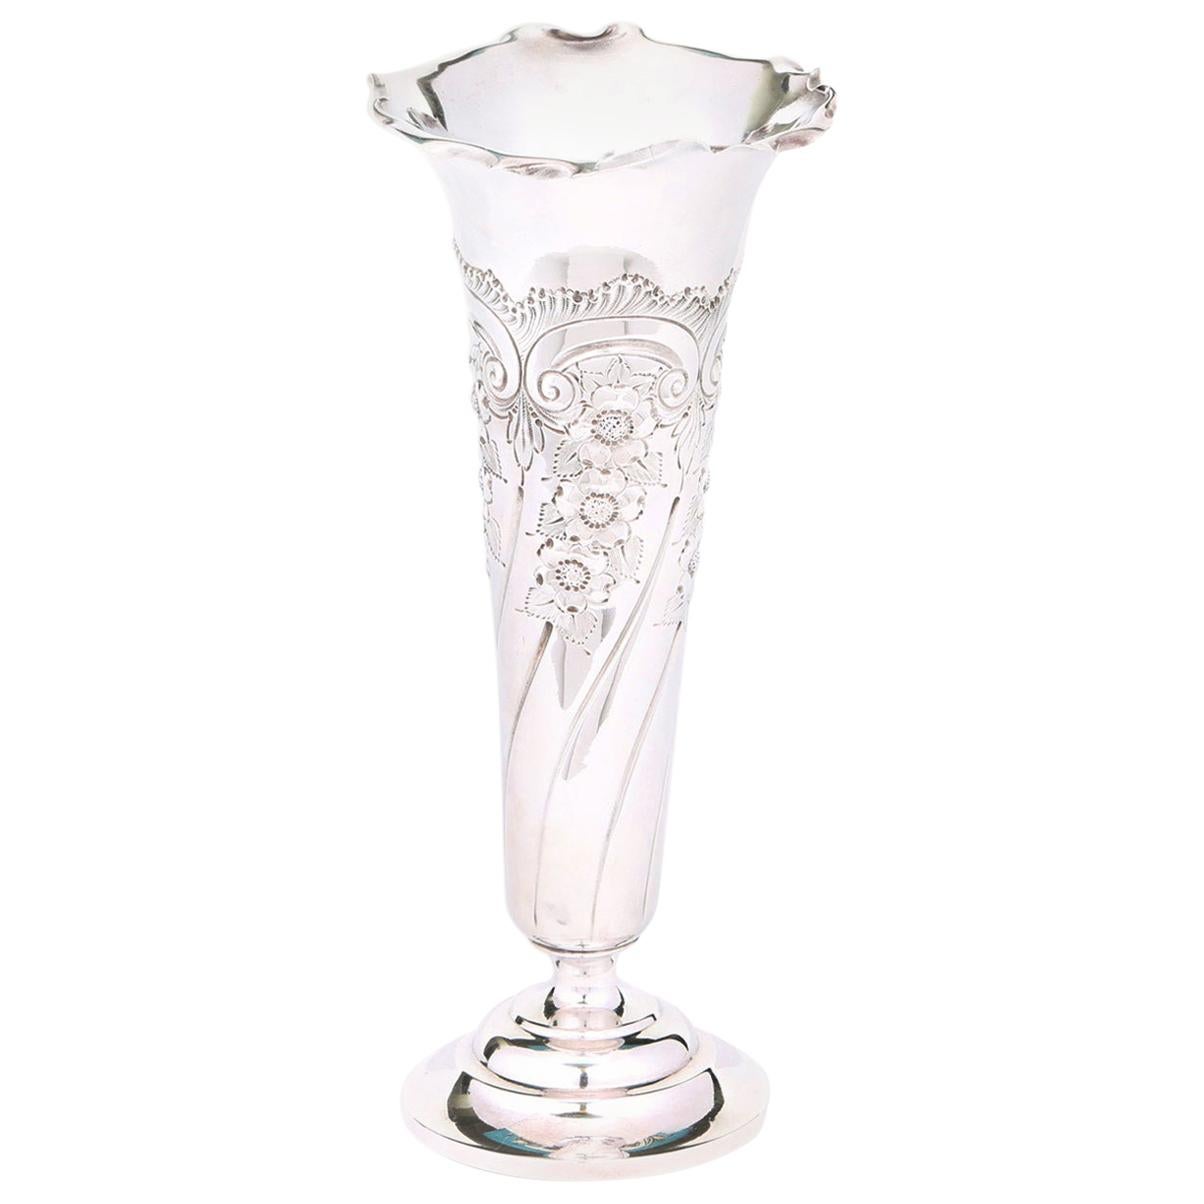 English Silver Plated Decorative Vase For Sale